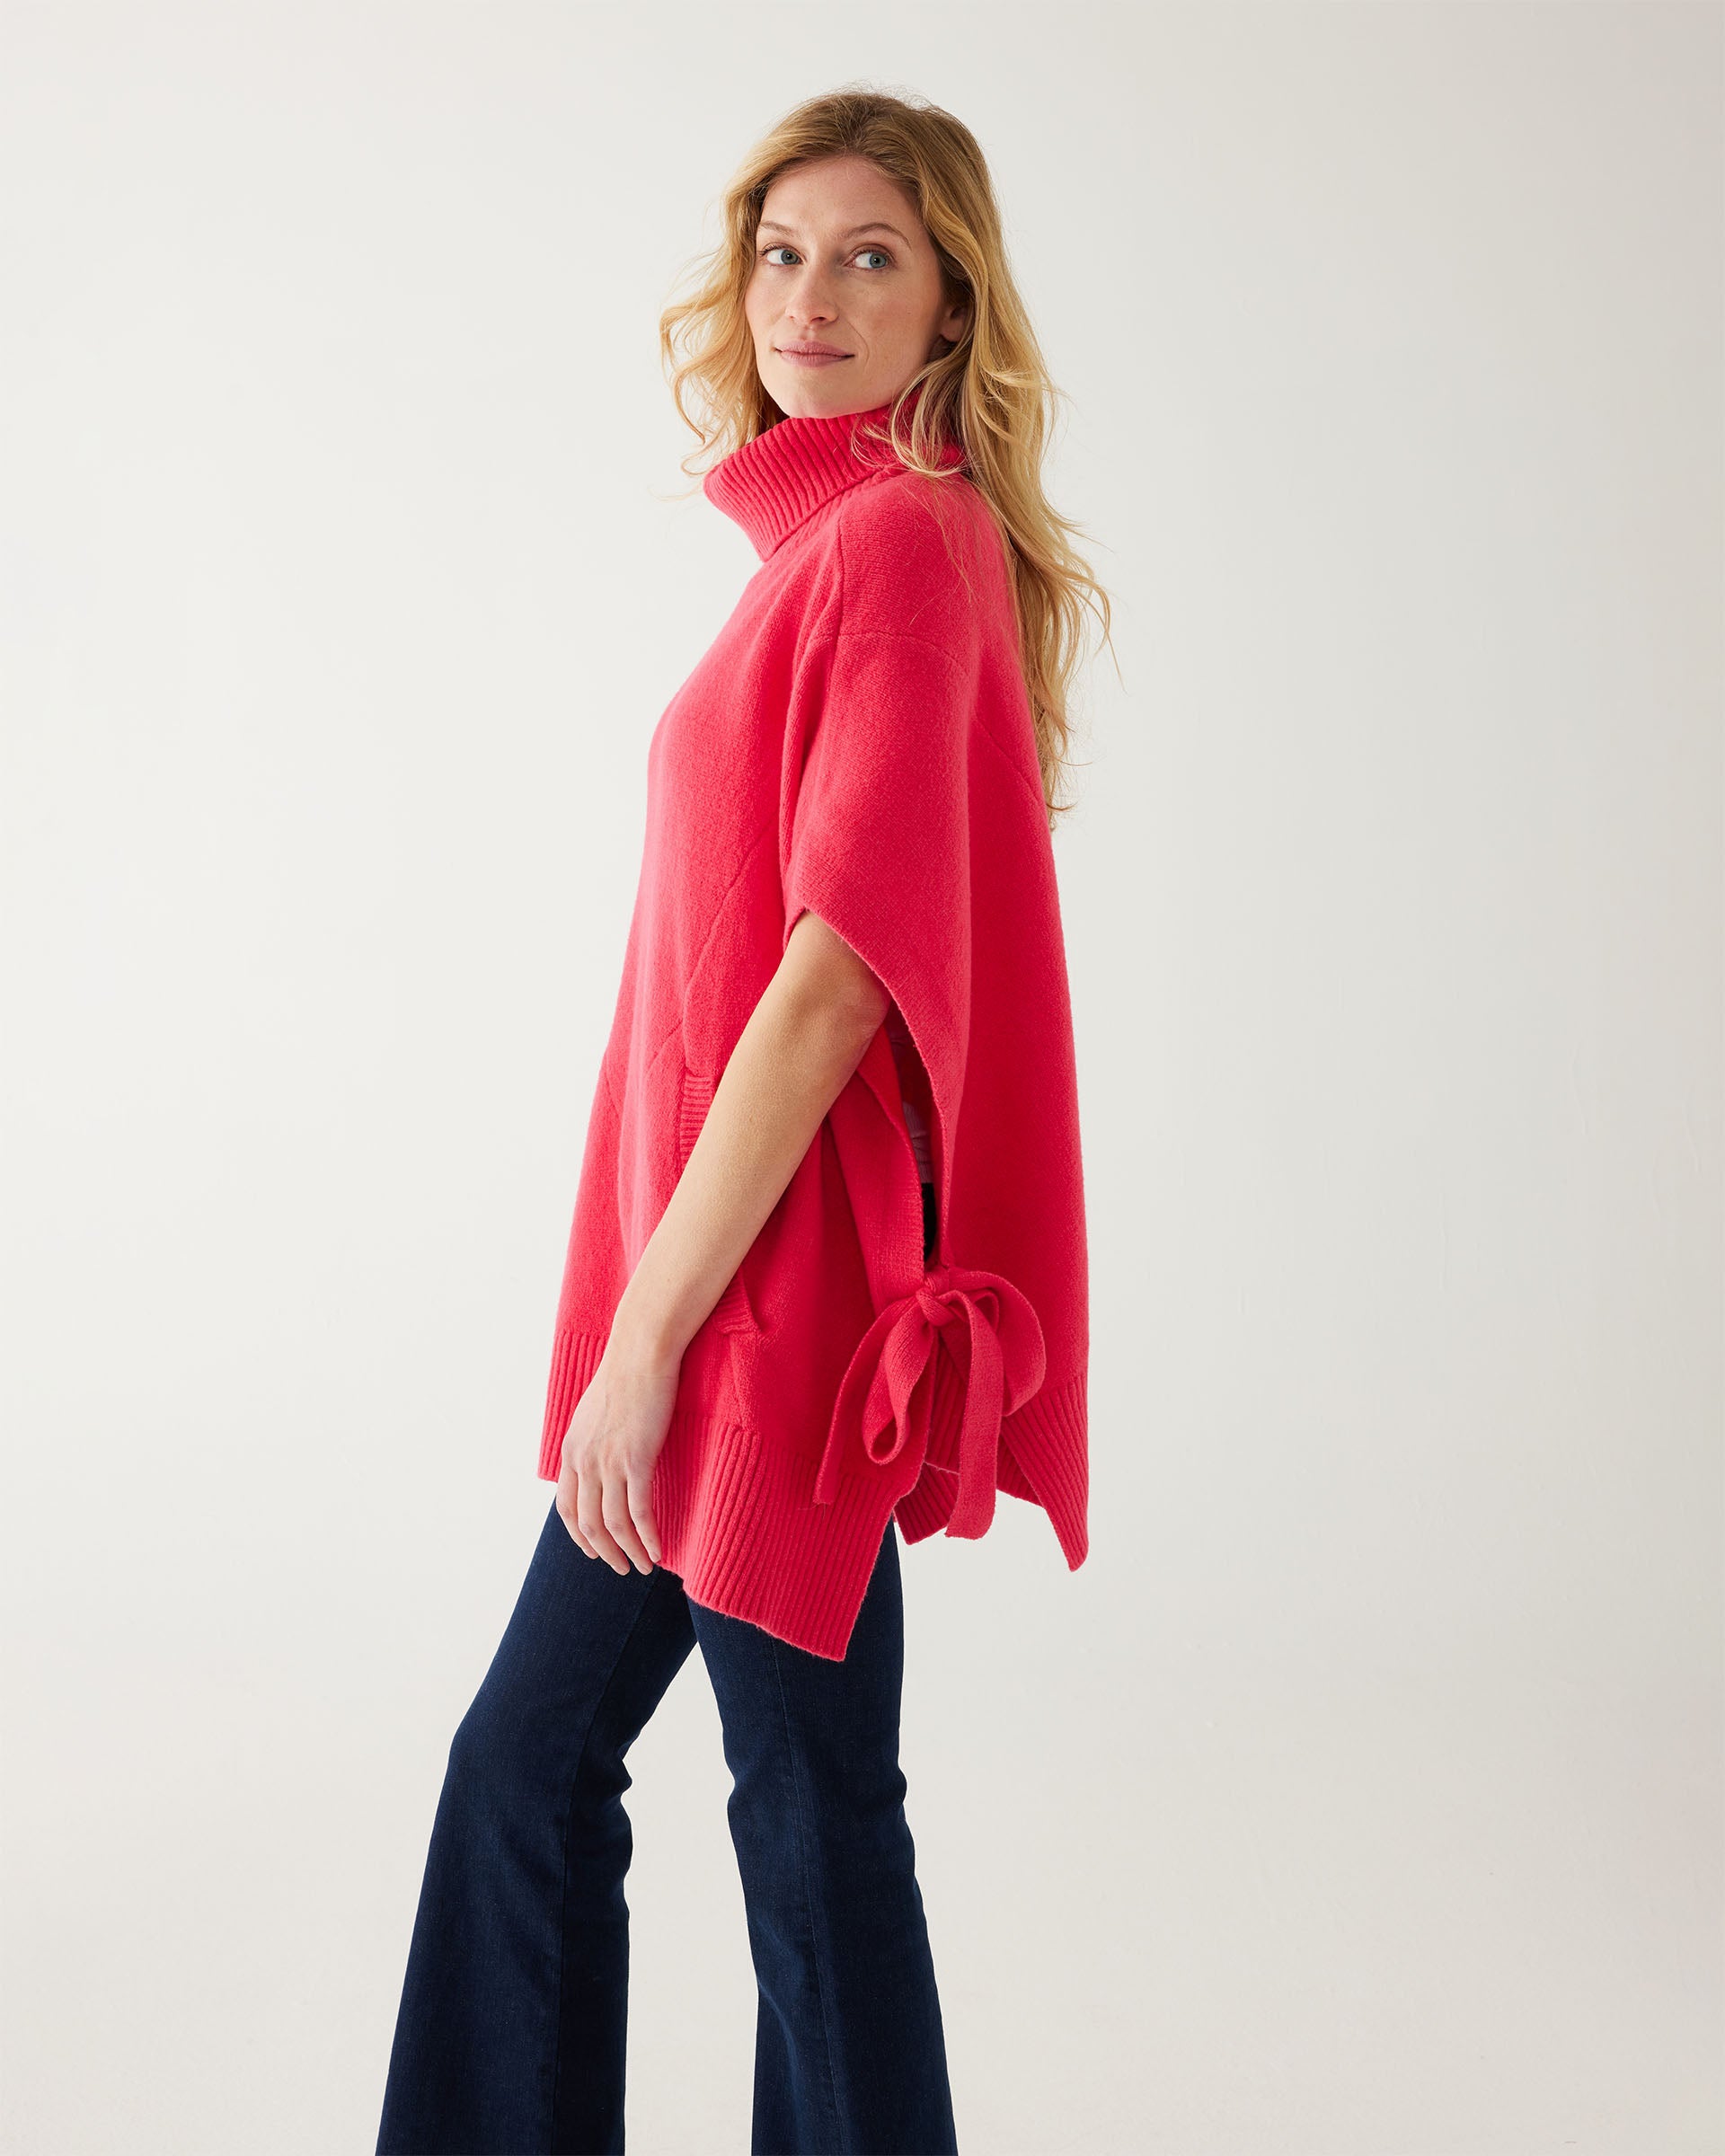 Cape Poncho Sweater is a Modern Twist on a Classic Silhouette | MERSEA